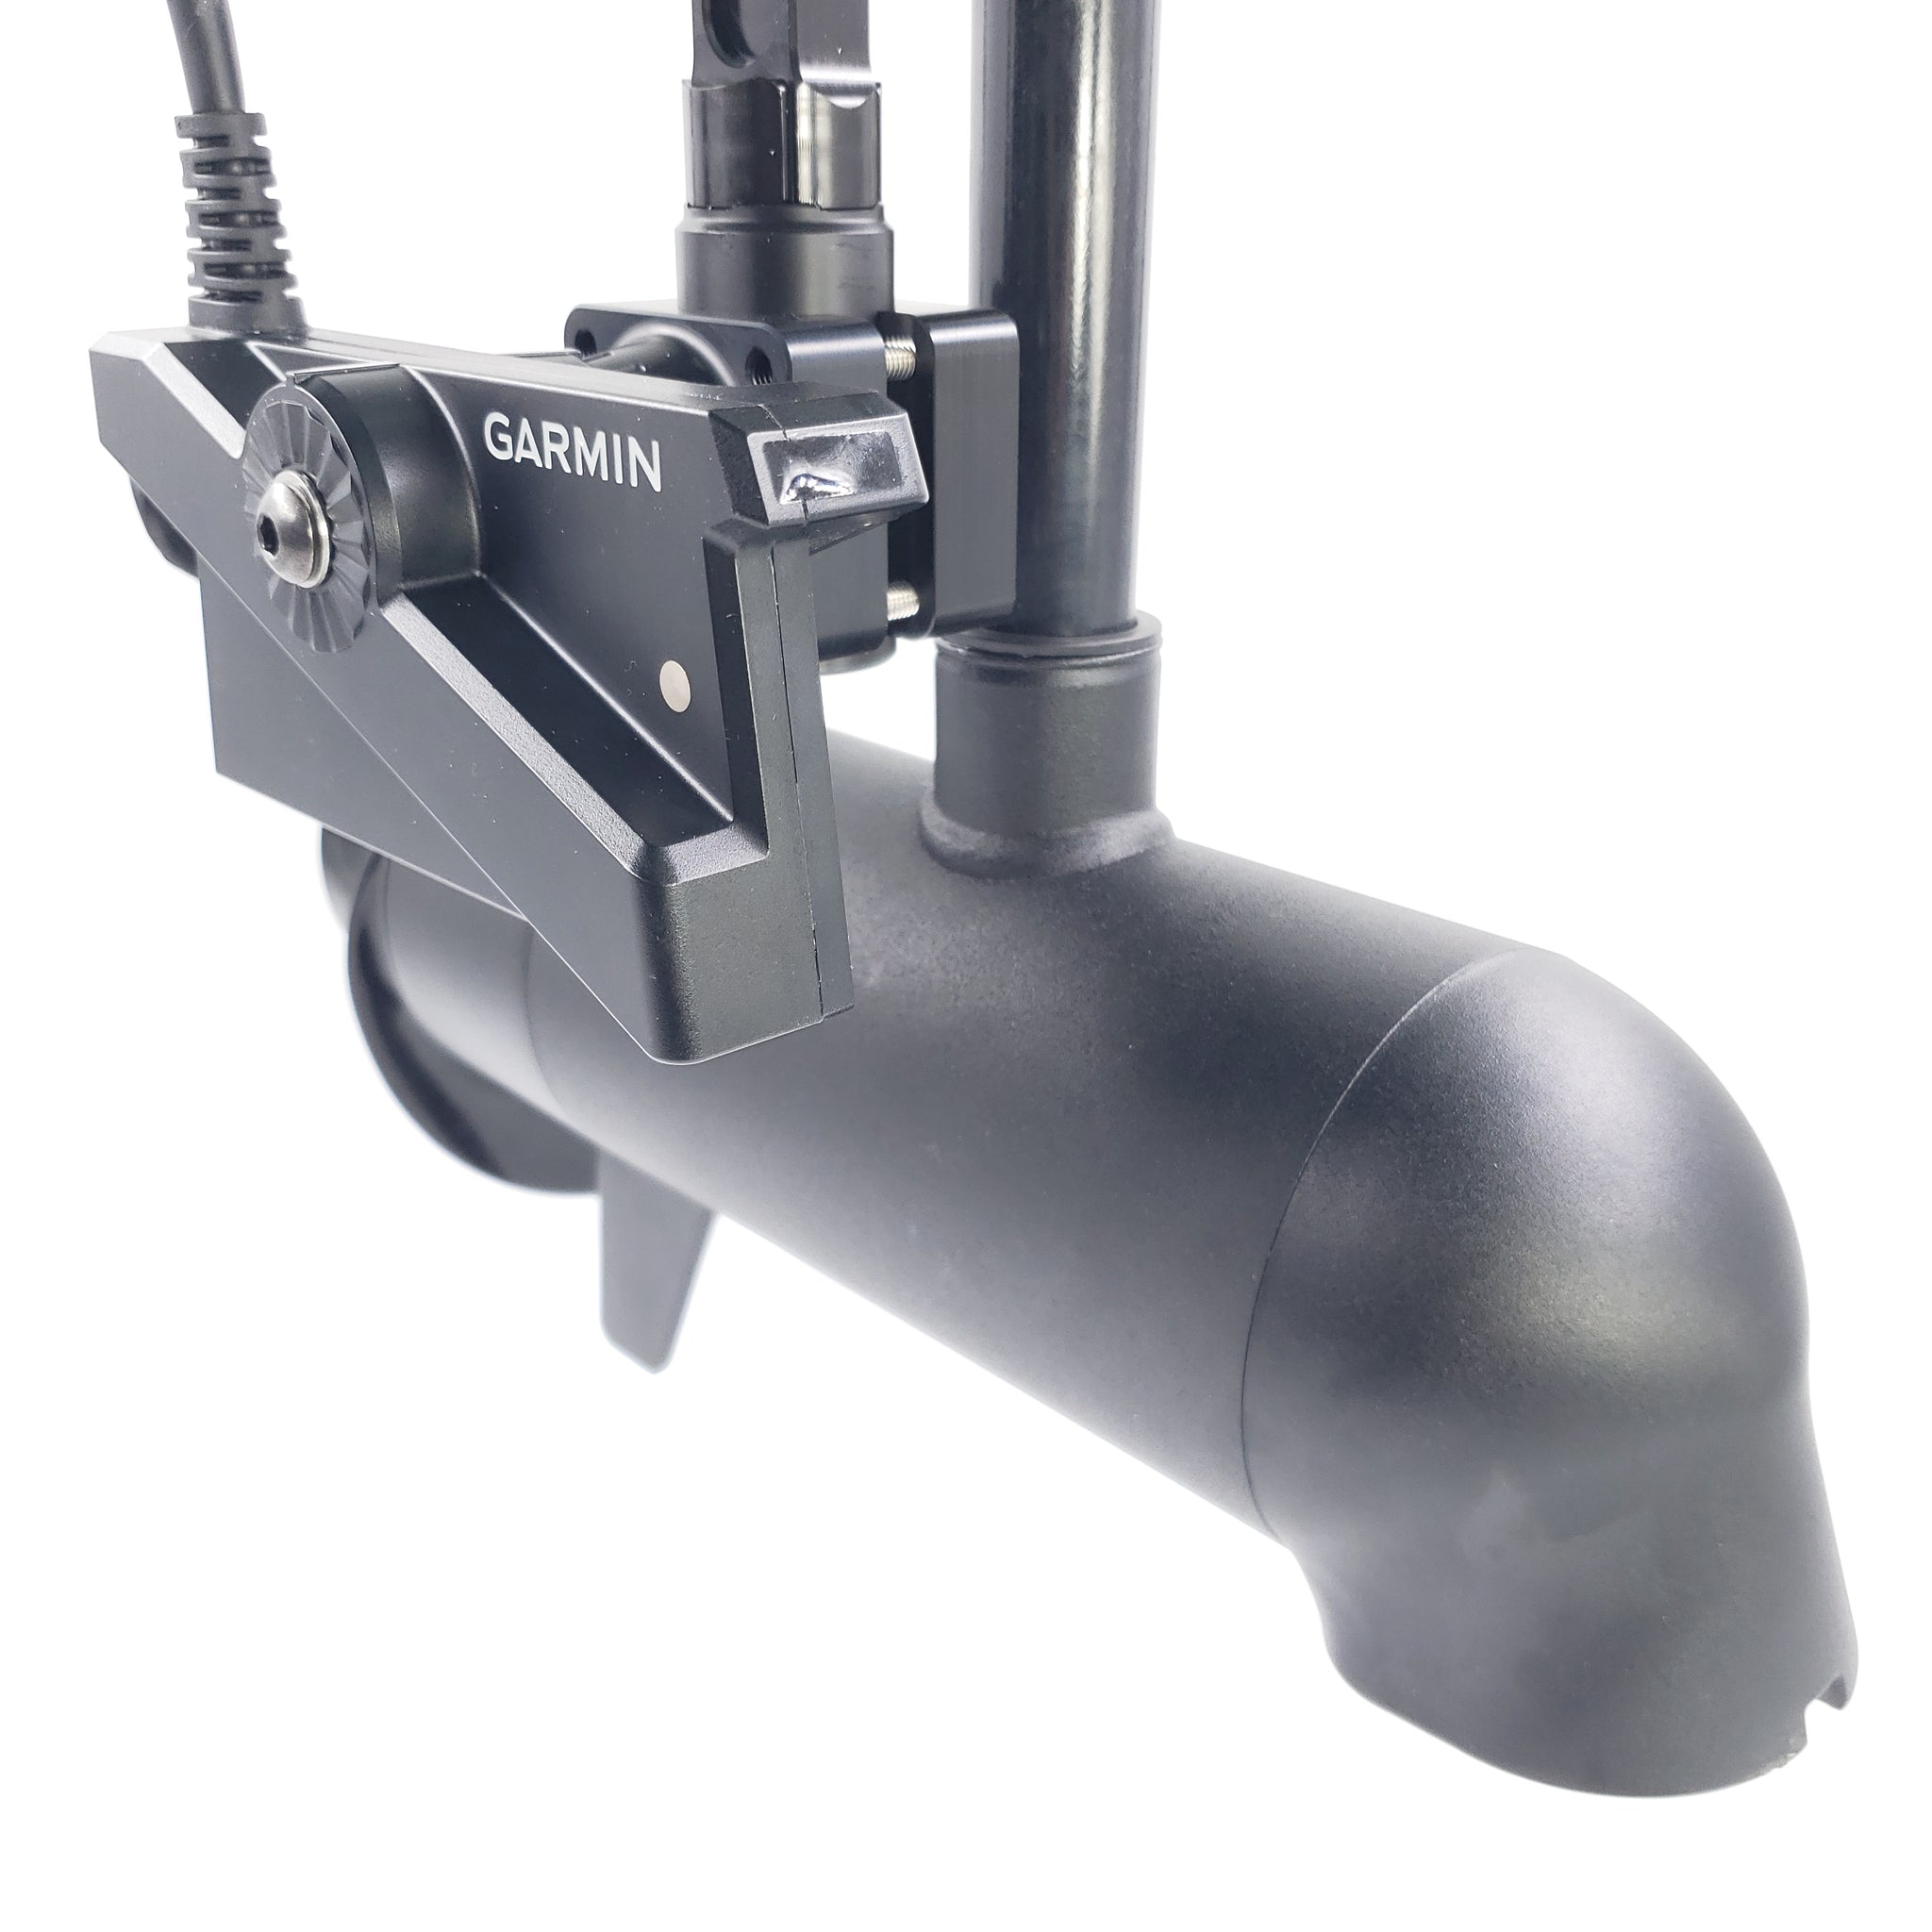 What's the Summer Garmin Livescope Pole mount for Scotty rail